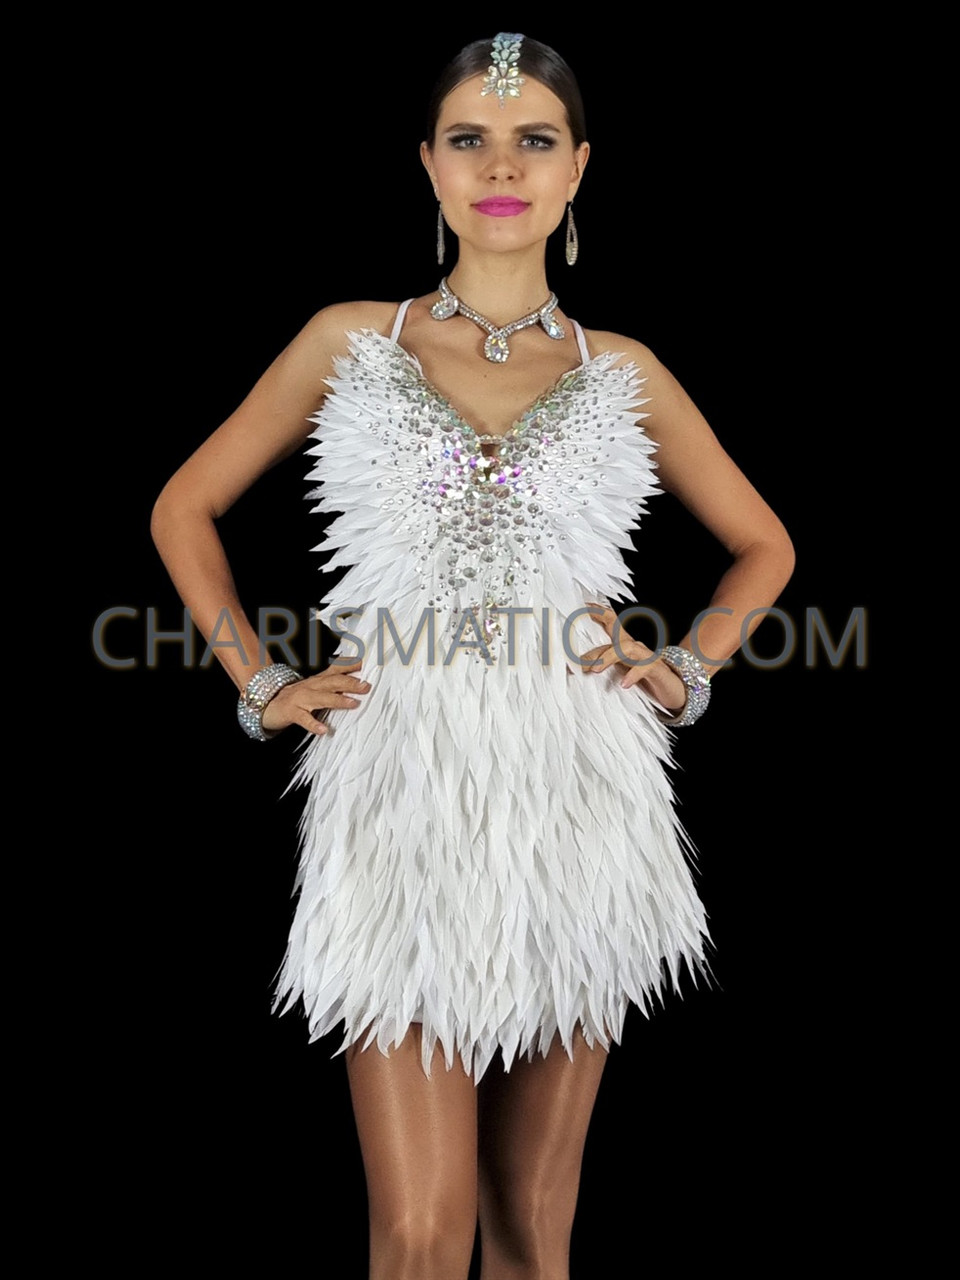 https://cdn11.bigcommerce.com/s-07991/images/stencil/1280x1280/products/6620/66971/DS6142_-_Angelic_White_Feather_Dress_with_Crystal_Embellishments_1__84123.1624605065.jpg?c=2